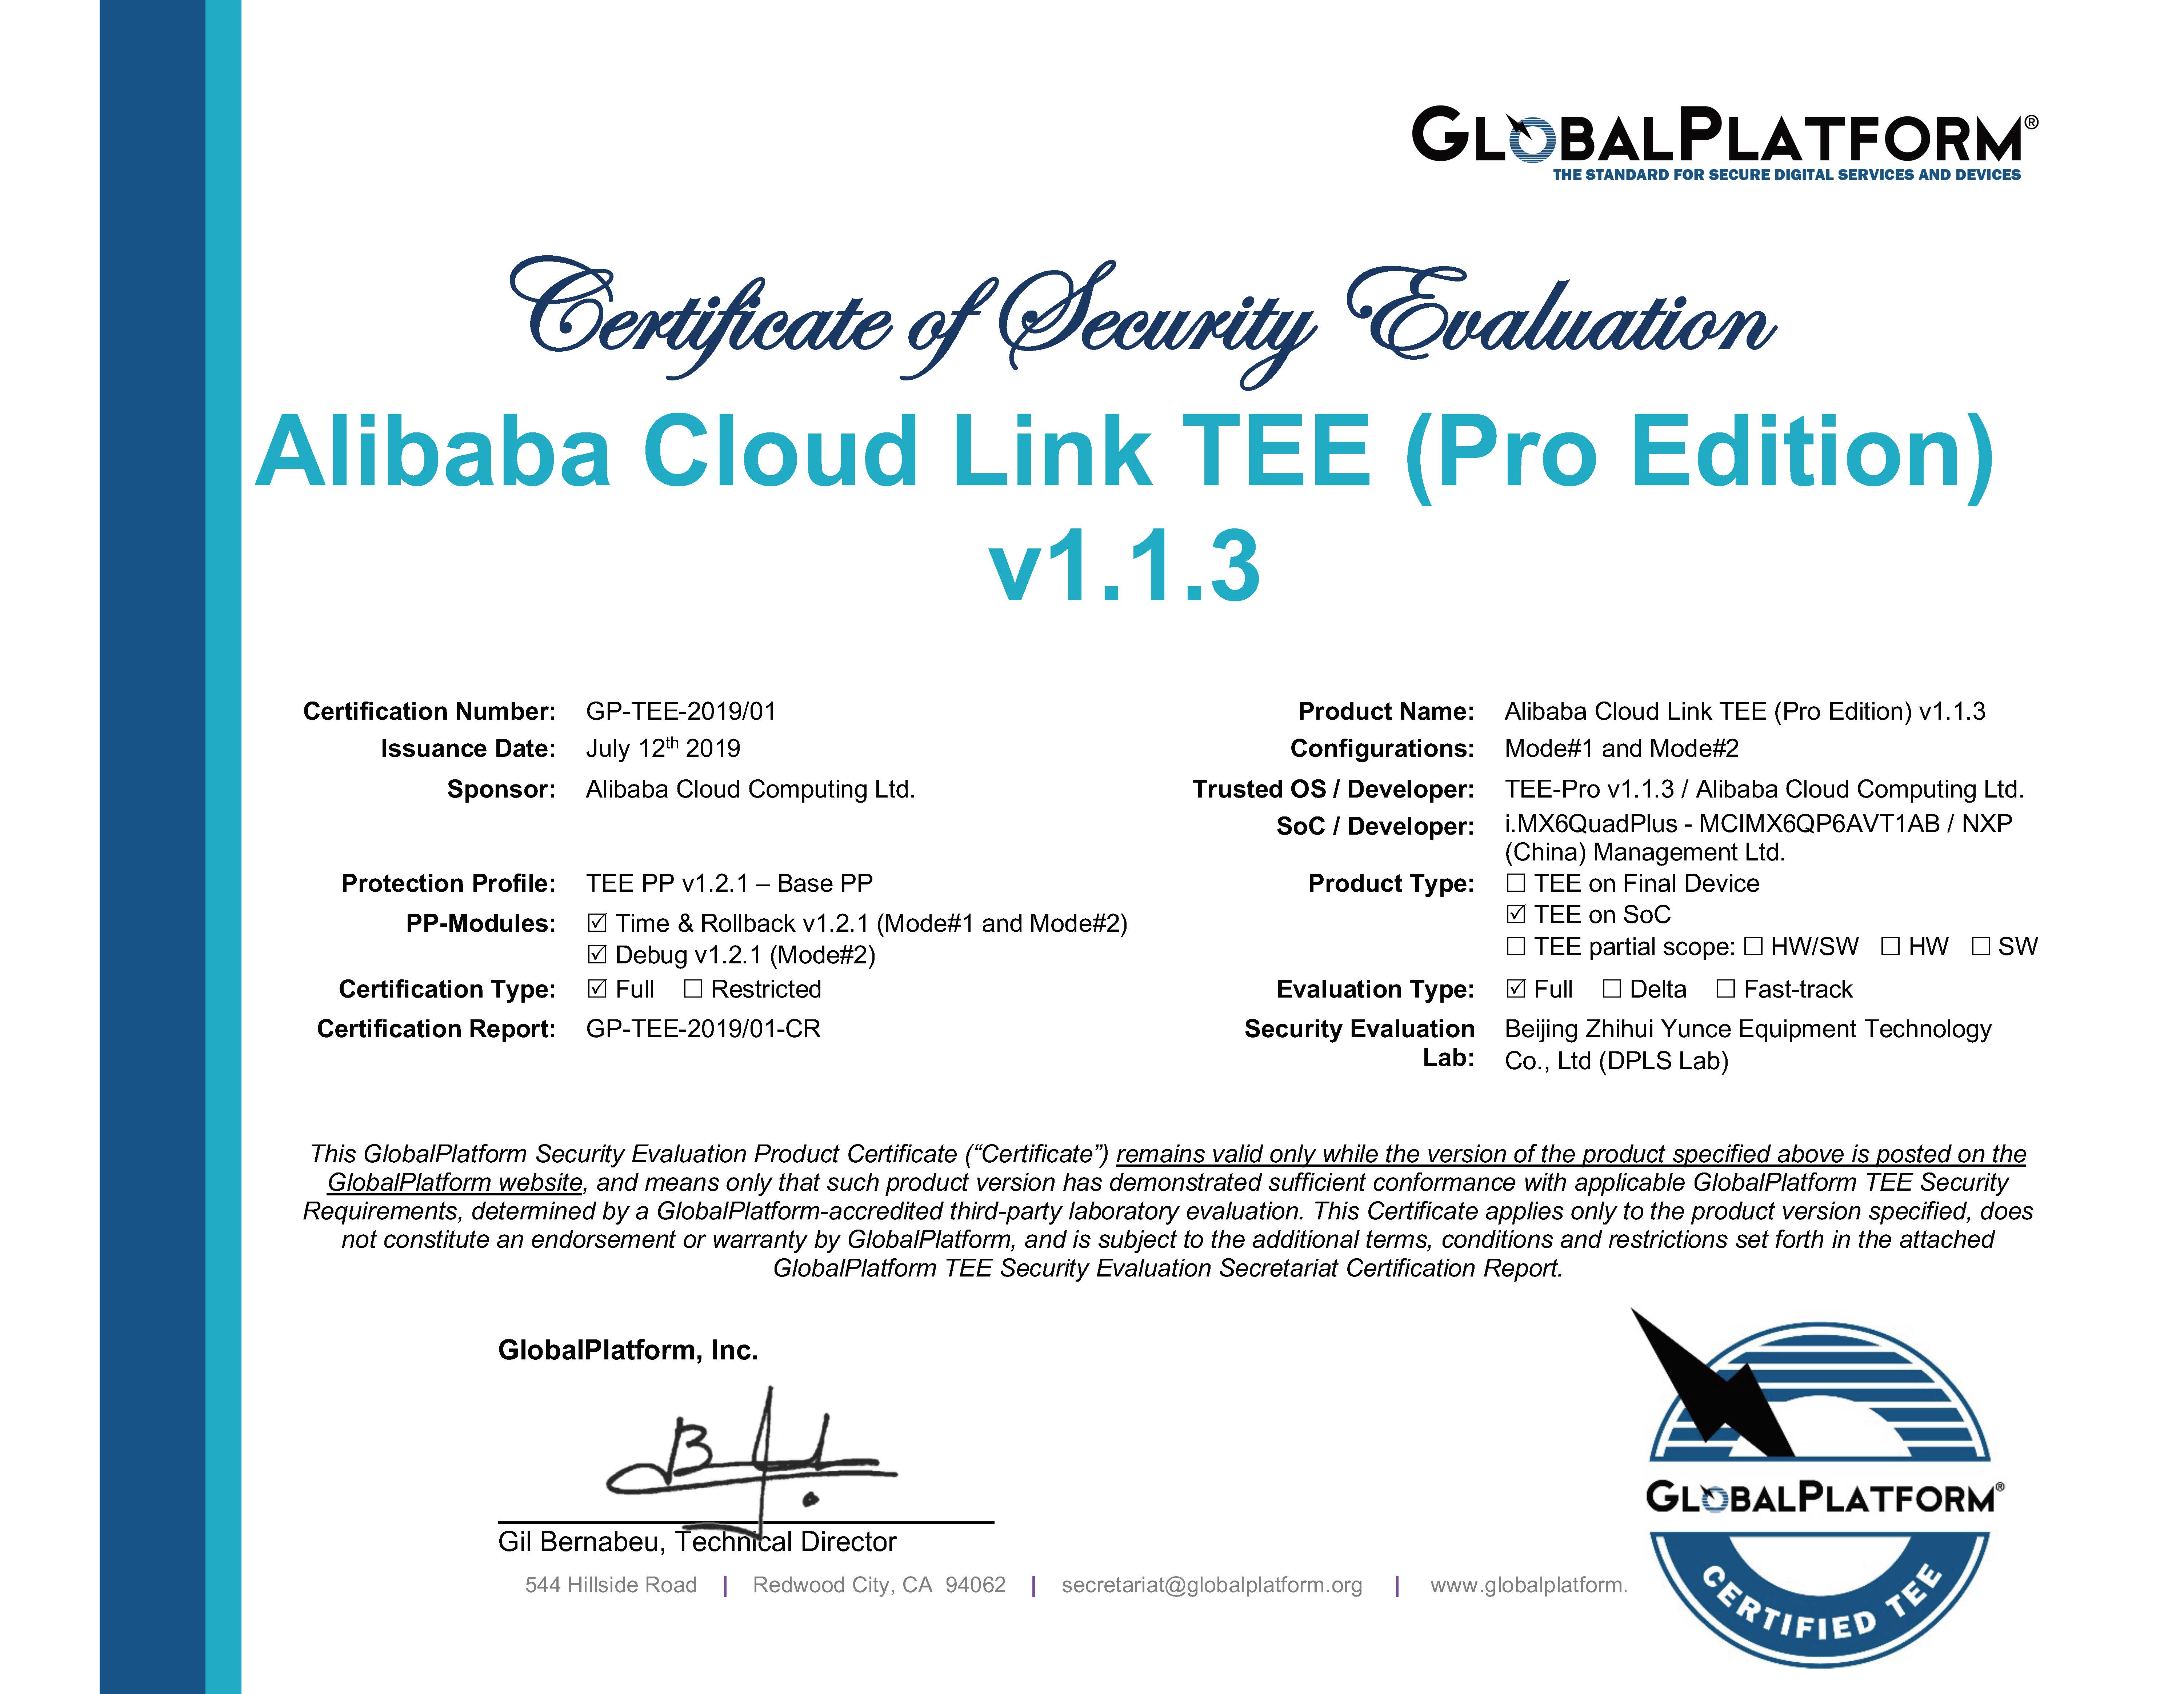 GP_TEE_2019_01_CR_1_0_GP180004_Certificate_and_Certification_Report_20190712___01